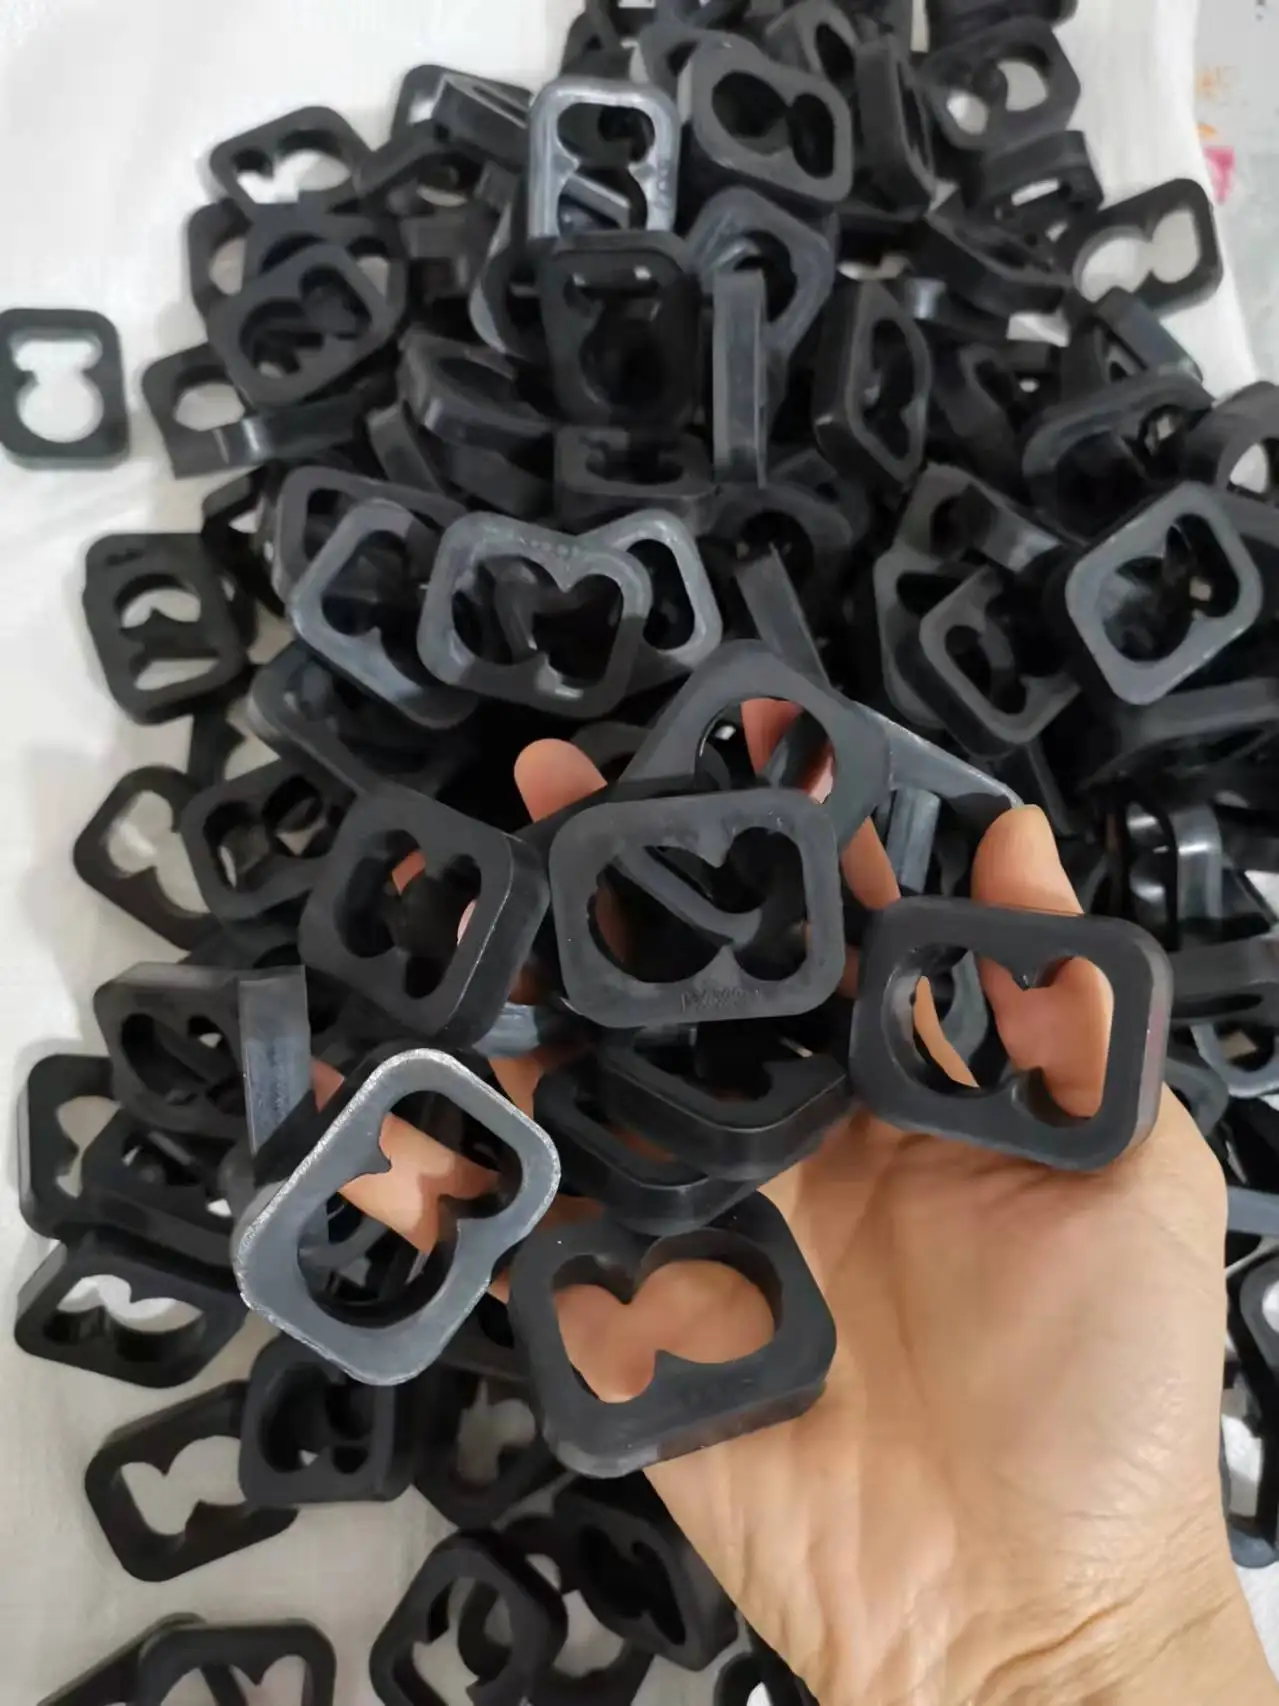 

100pcs Rubber Clamp Milking Tube& Twin Air Hose Fix Clip For Cow Goat Sheep Milking Machines